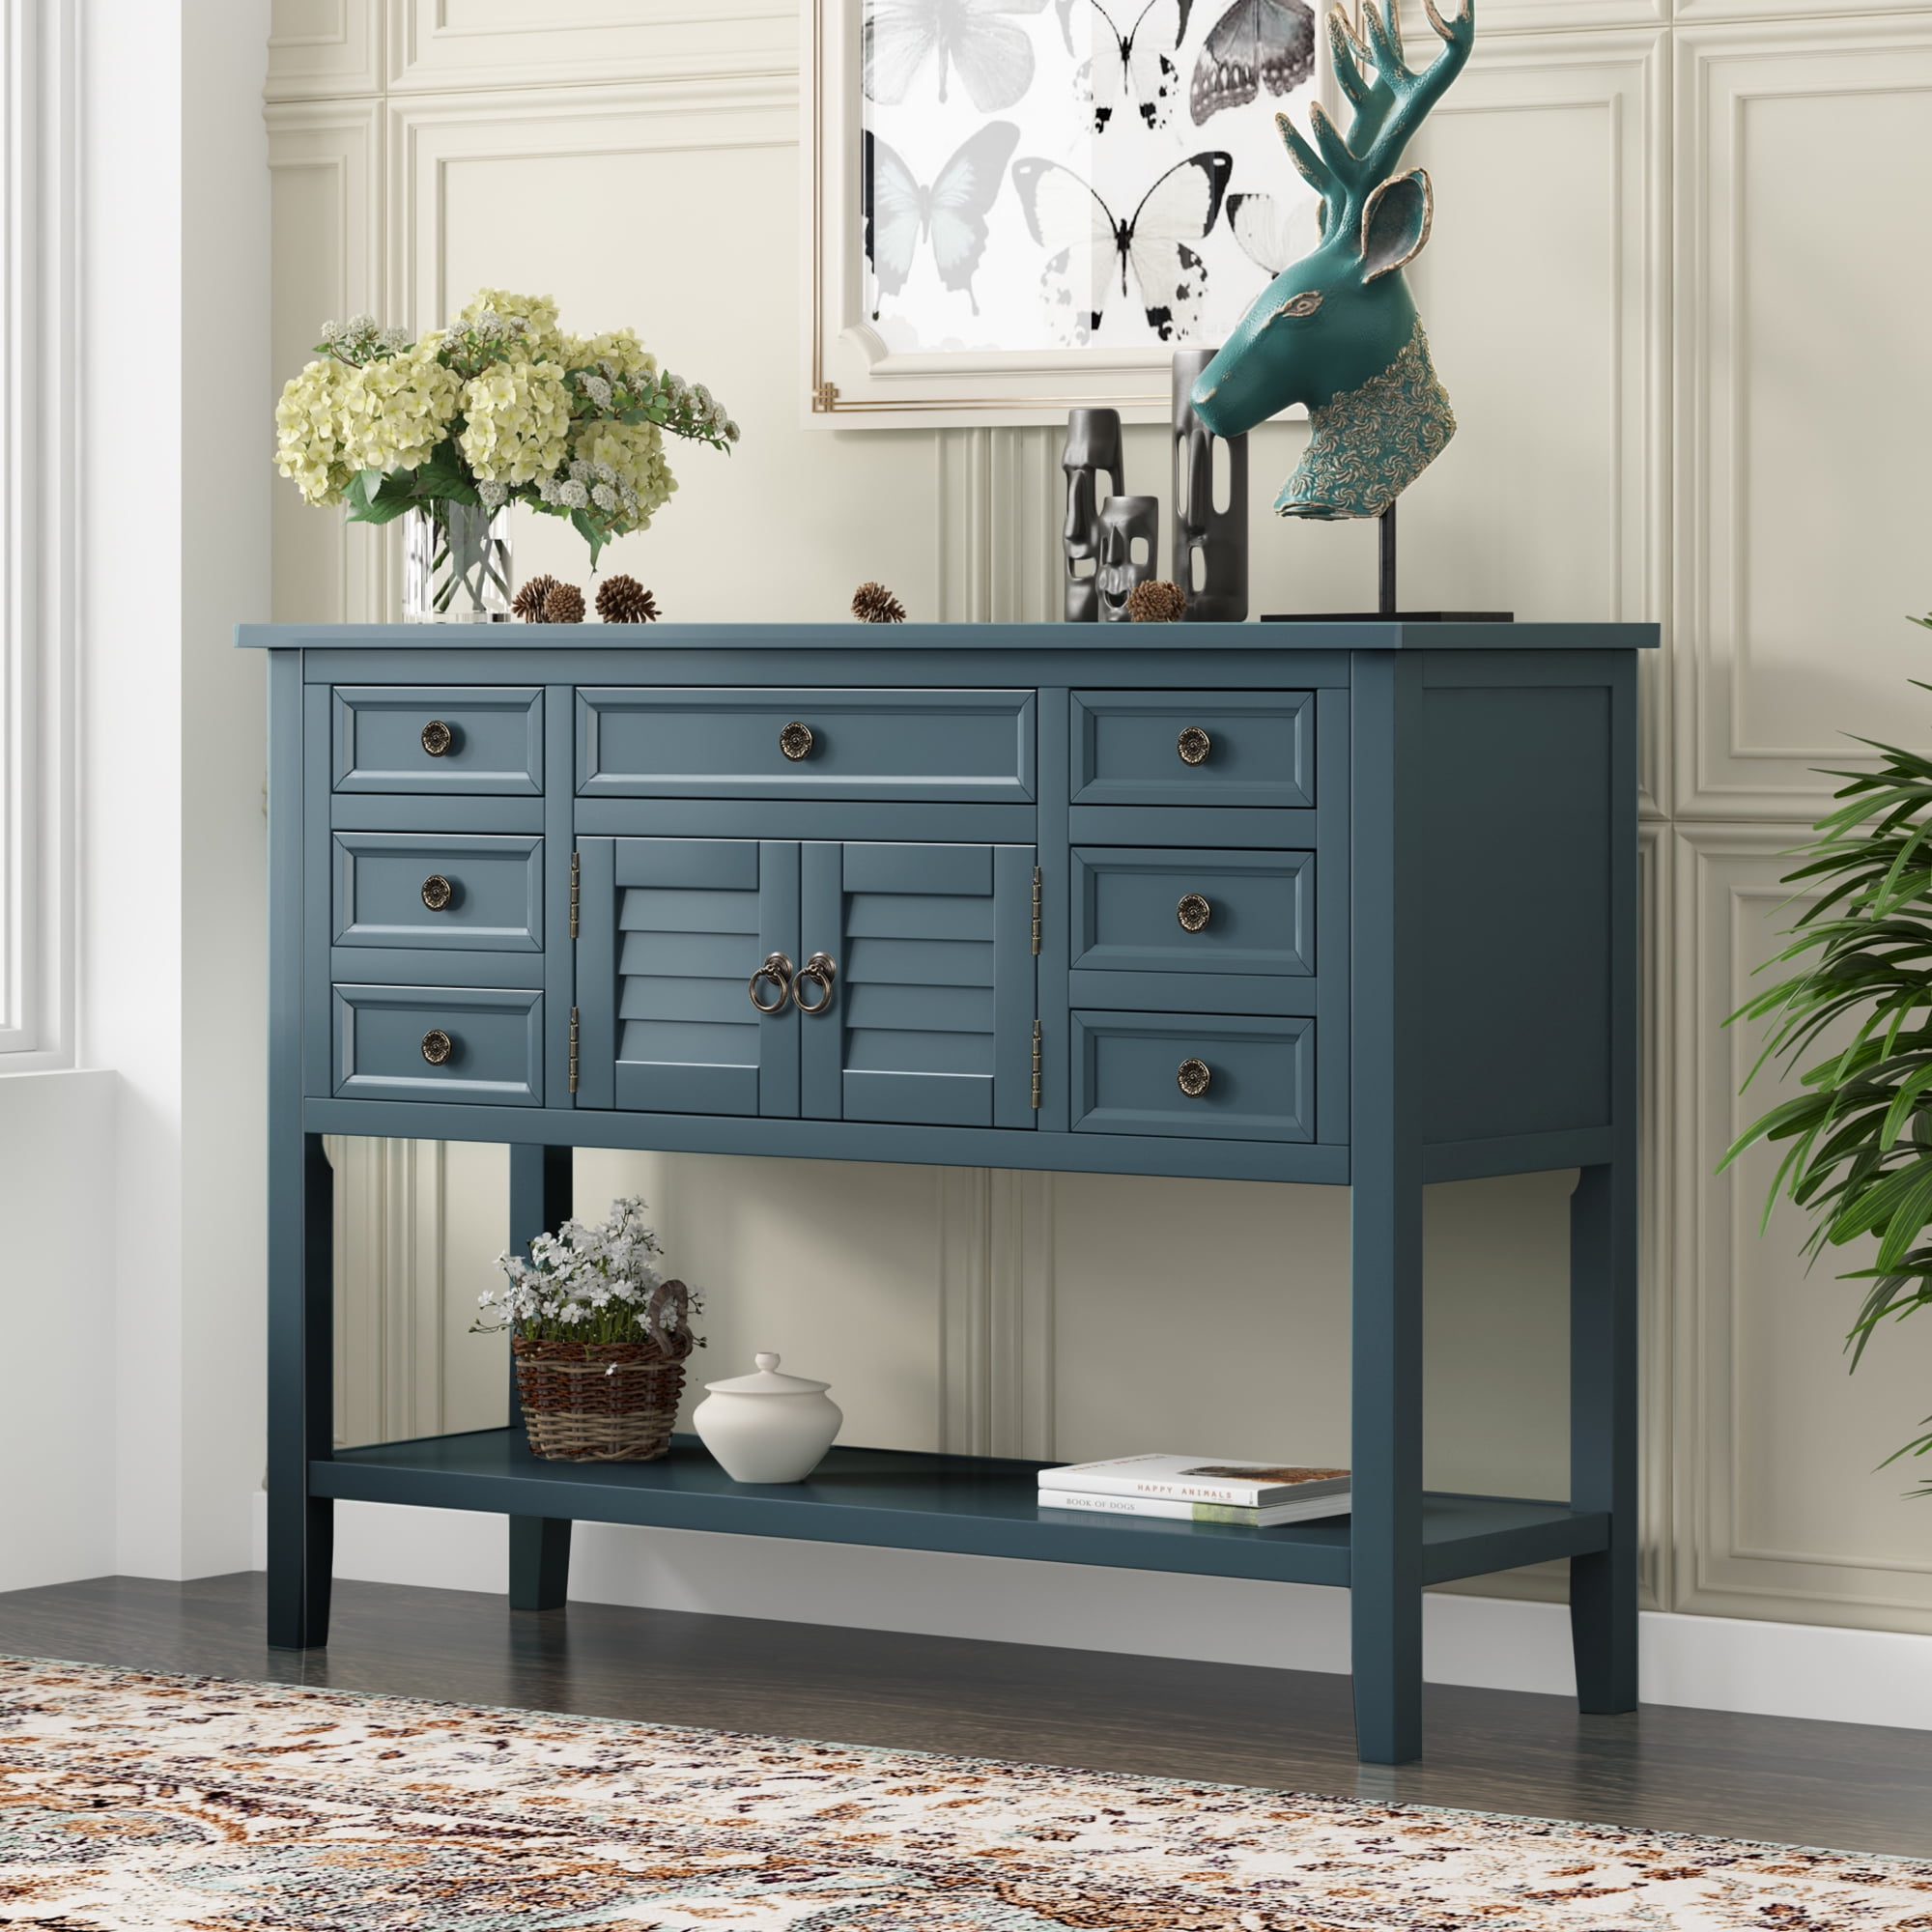 Storage Buffet Sideboard Cabinet for Kitchen/Entryway Side Table for Living Room Antique Navy Wood Console Sofa Table with Drawers and Bottom Shelf